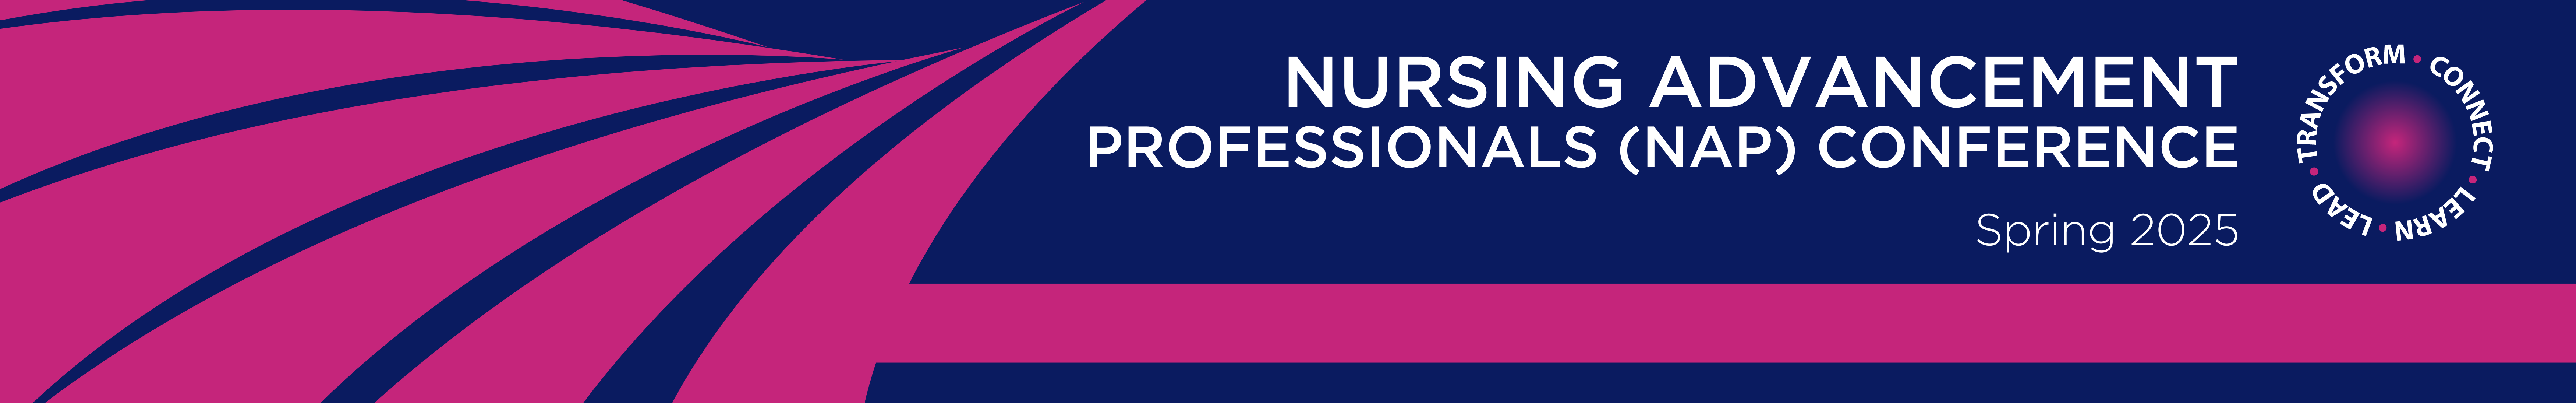 american association of colleges of nursing | the voice of academic nursing | Nursing Advancement Professionals (NAP) Conference | Transform. connect. learn. lead